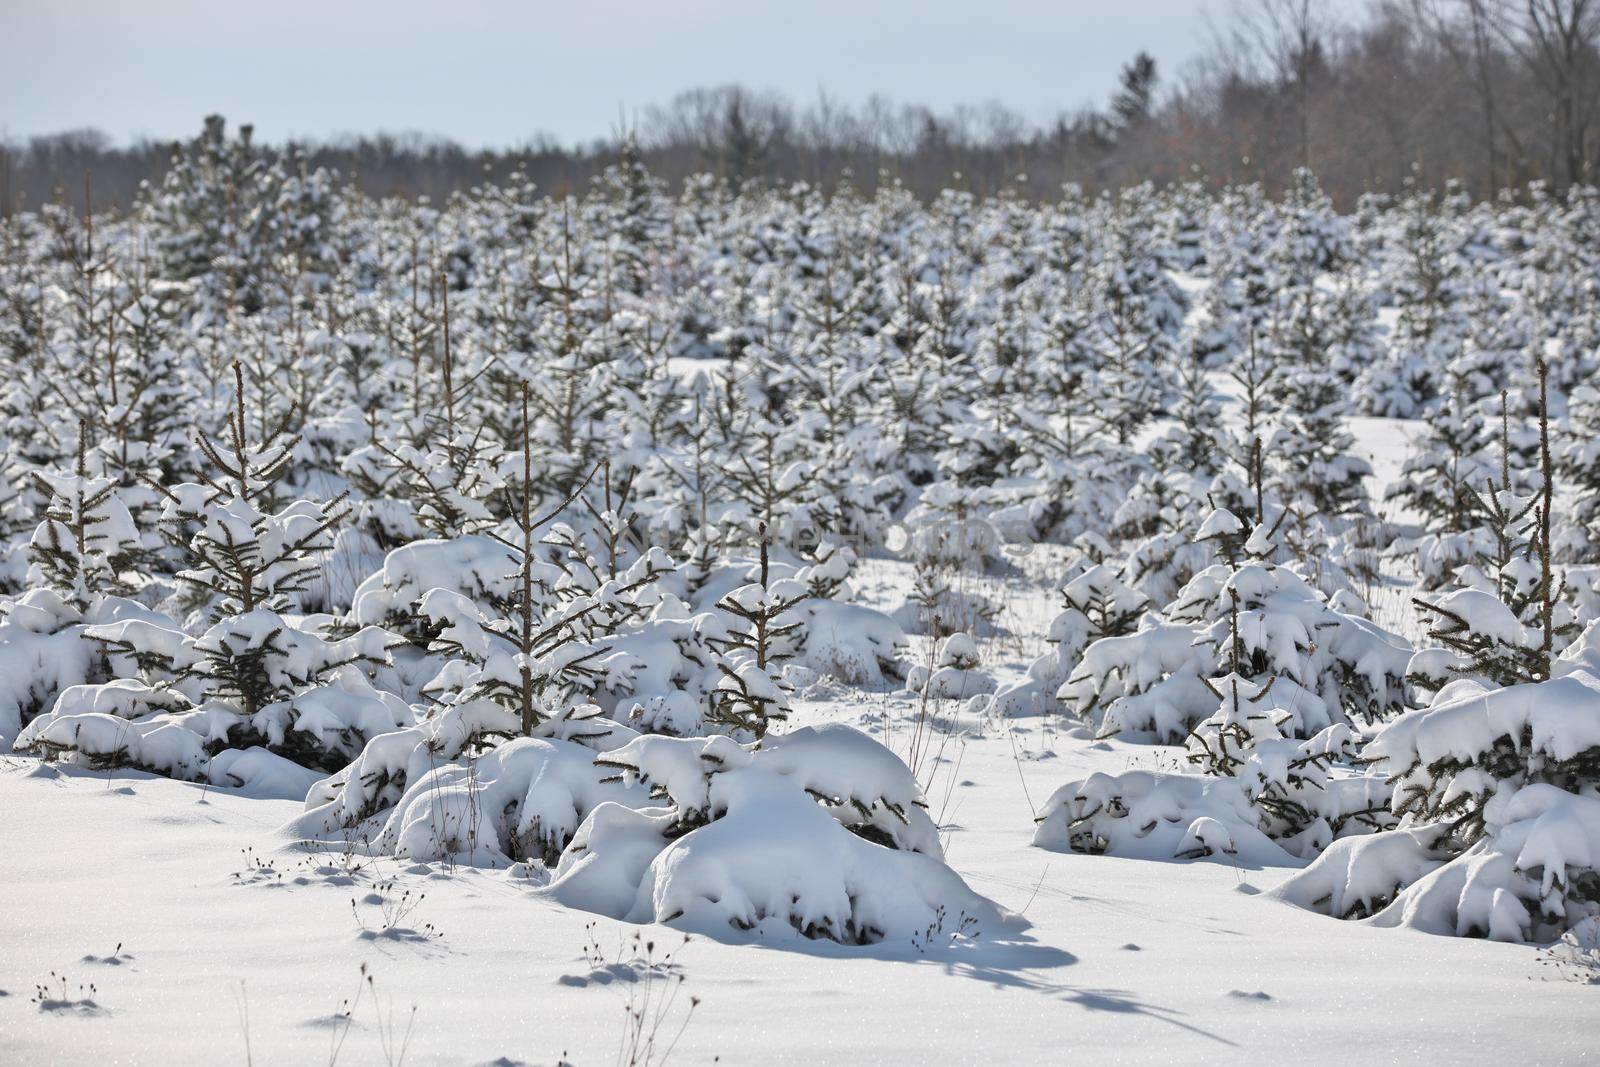 A field full of planted baby evergreen trees covered in snow by markvandam